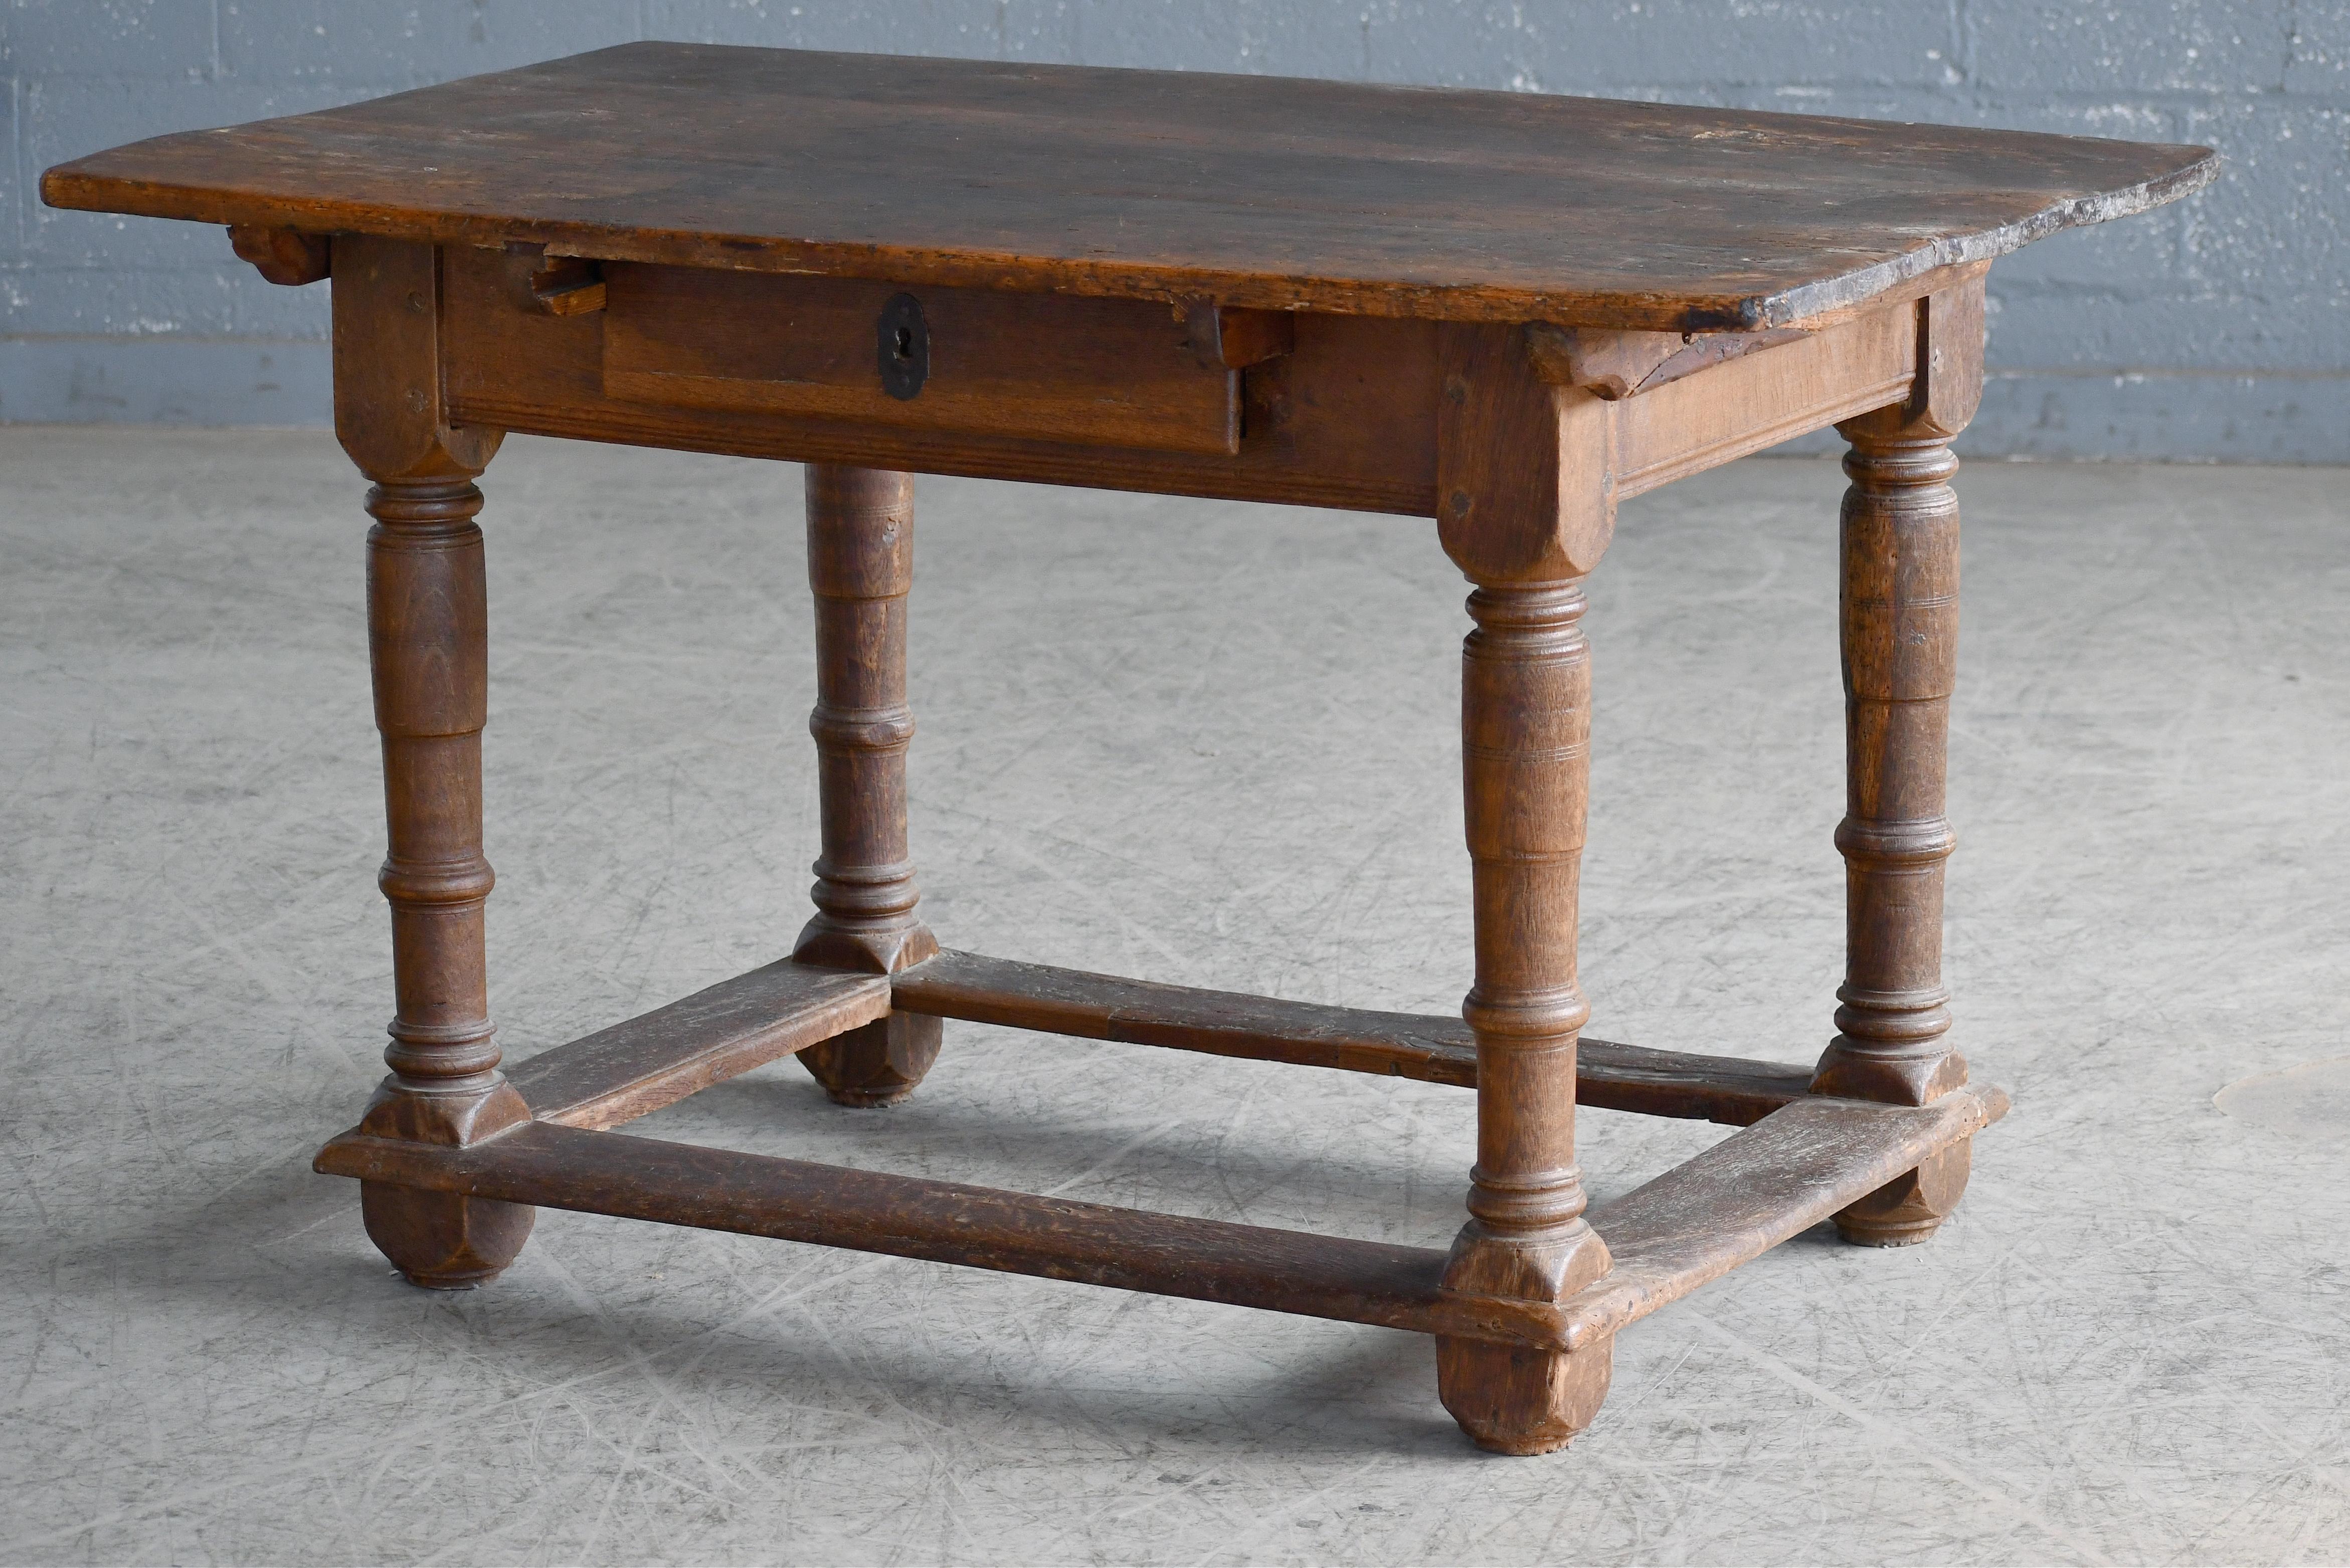 Danish Country or Provence Style Dining Table in Rustic Oak from Denmark, circa 1900  For Sale